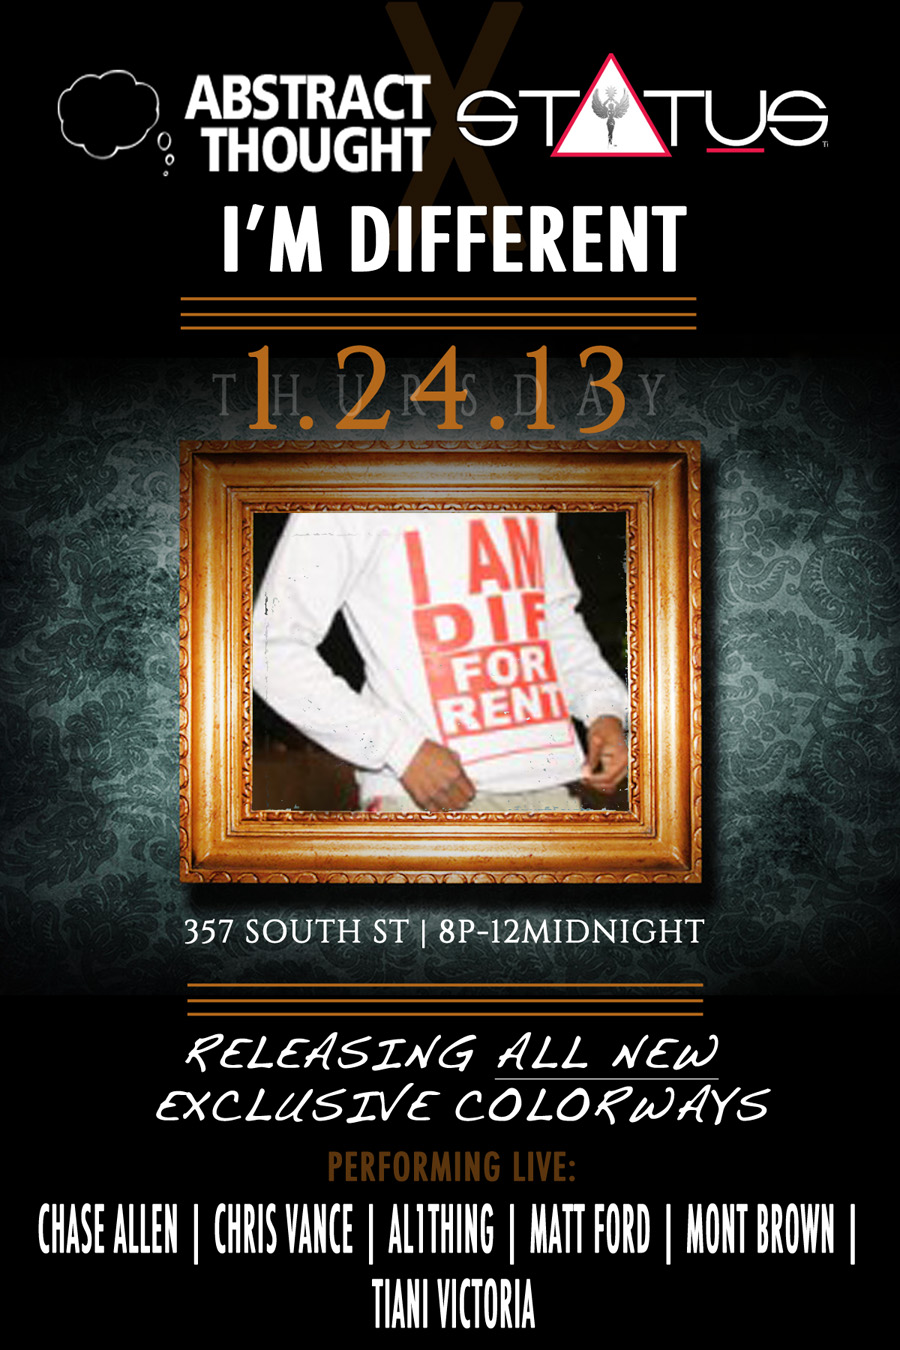 IMDIFFERENTrevised  Abstract Thought & Status Shop #ImDifferent Thurs 8pm Ft @TianiVictoria @MontBrown @Al_1thing and More 